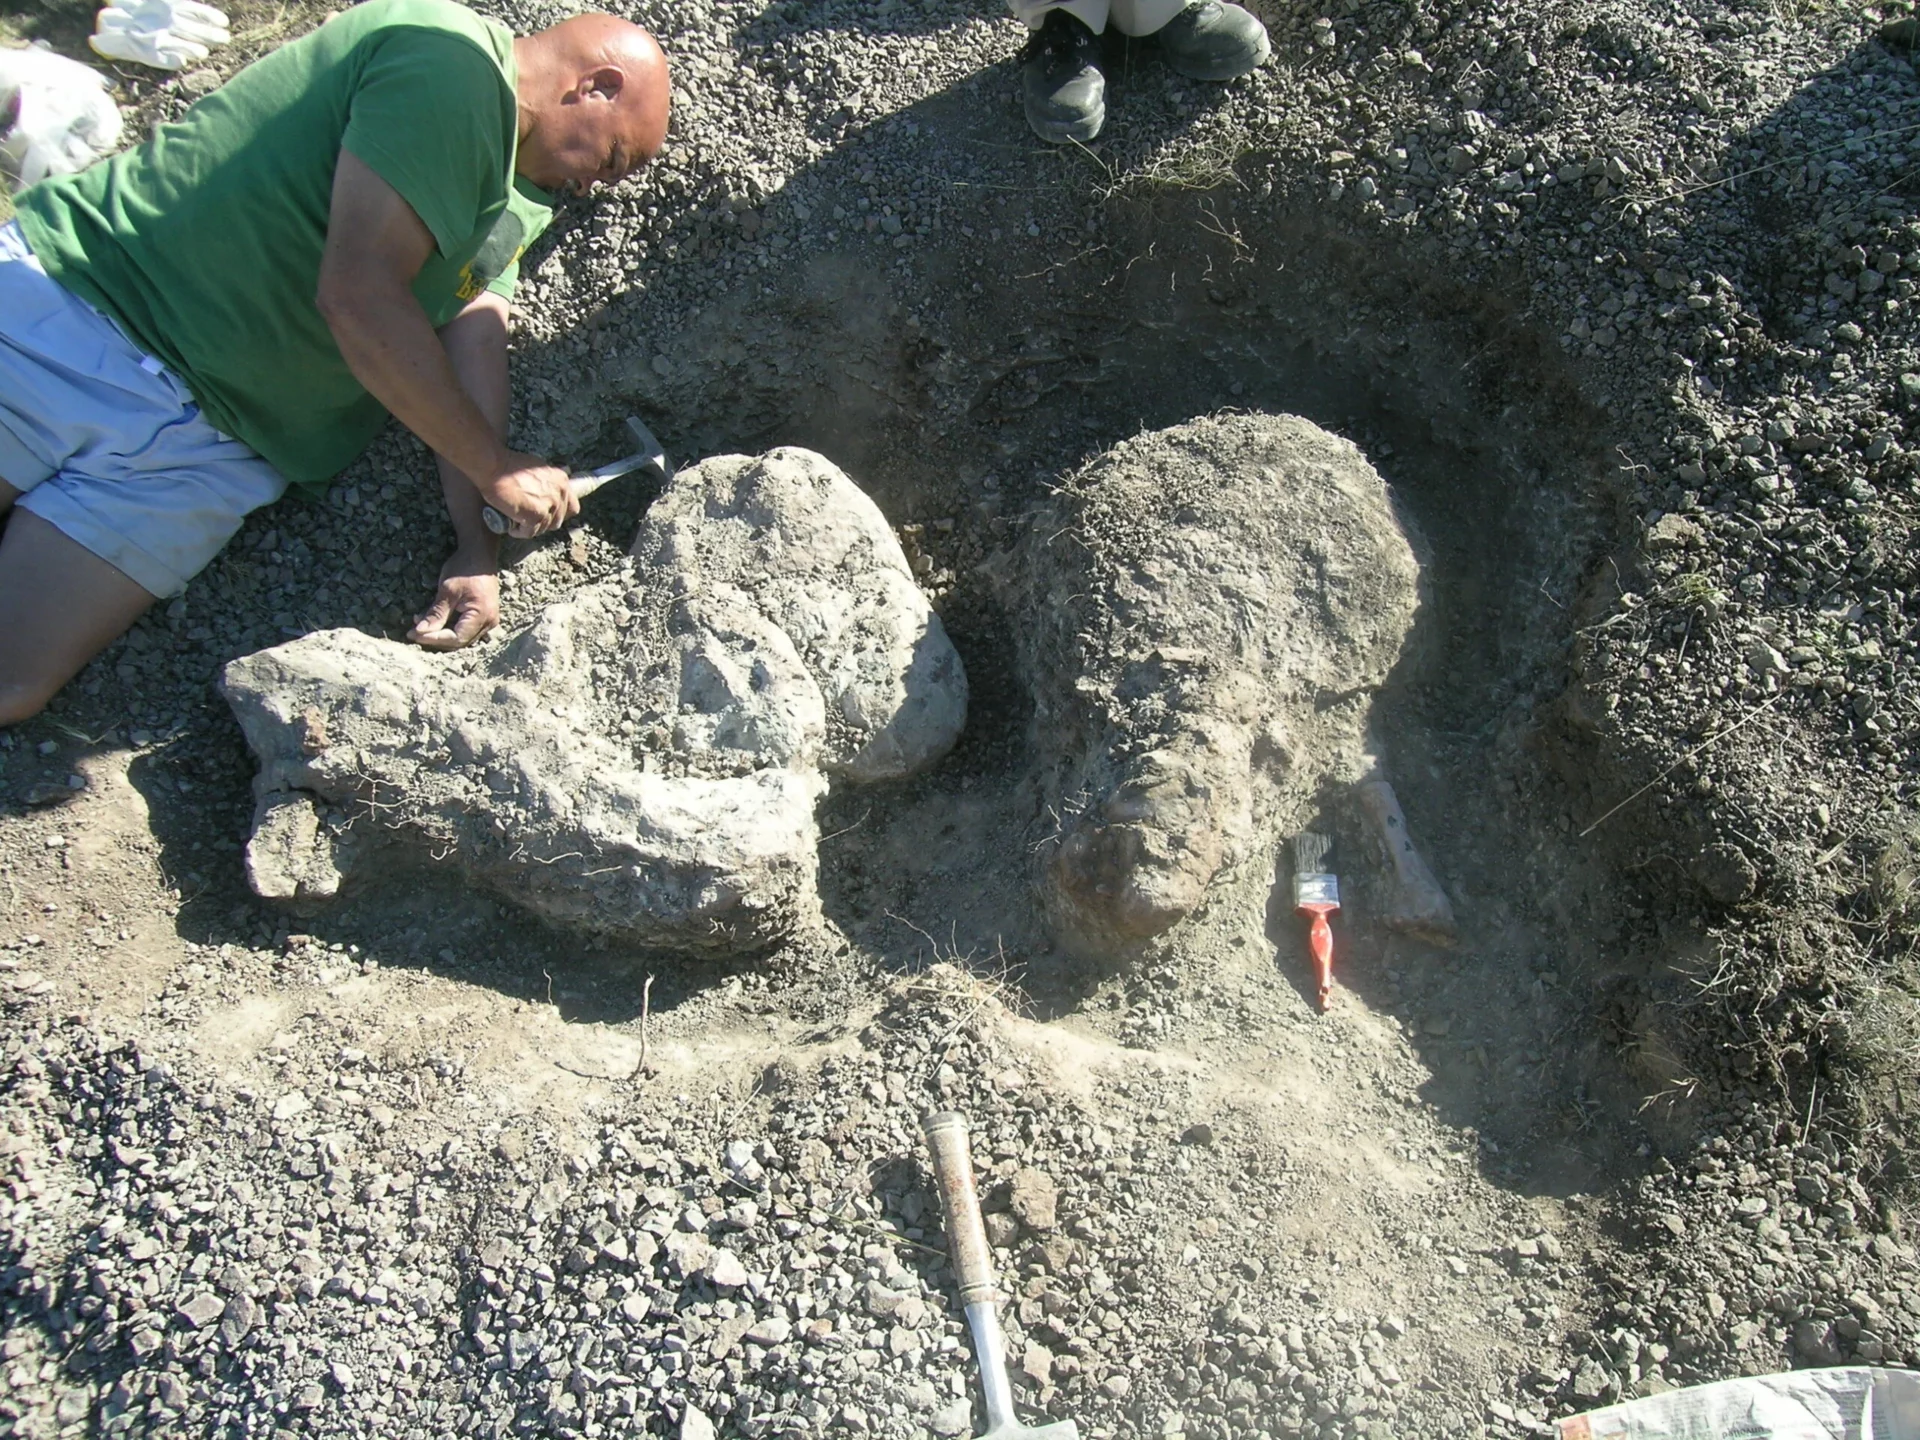 (Image of Inostrancevia fossils in the field sourced from CNN)